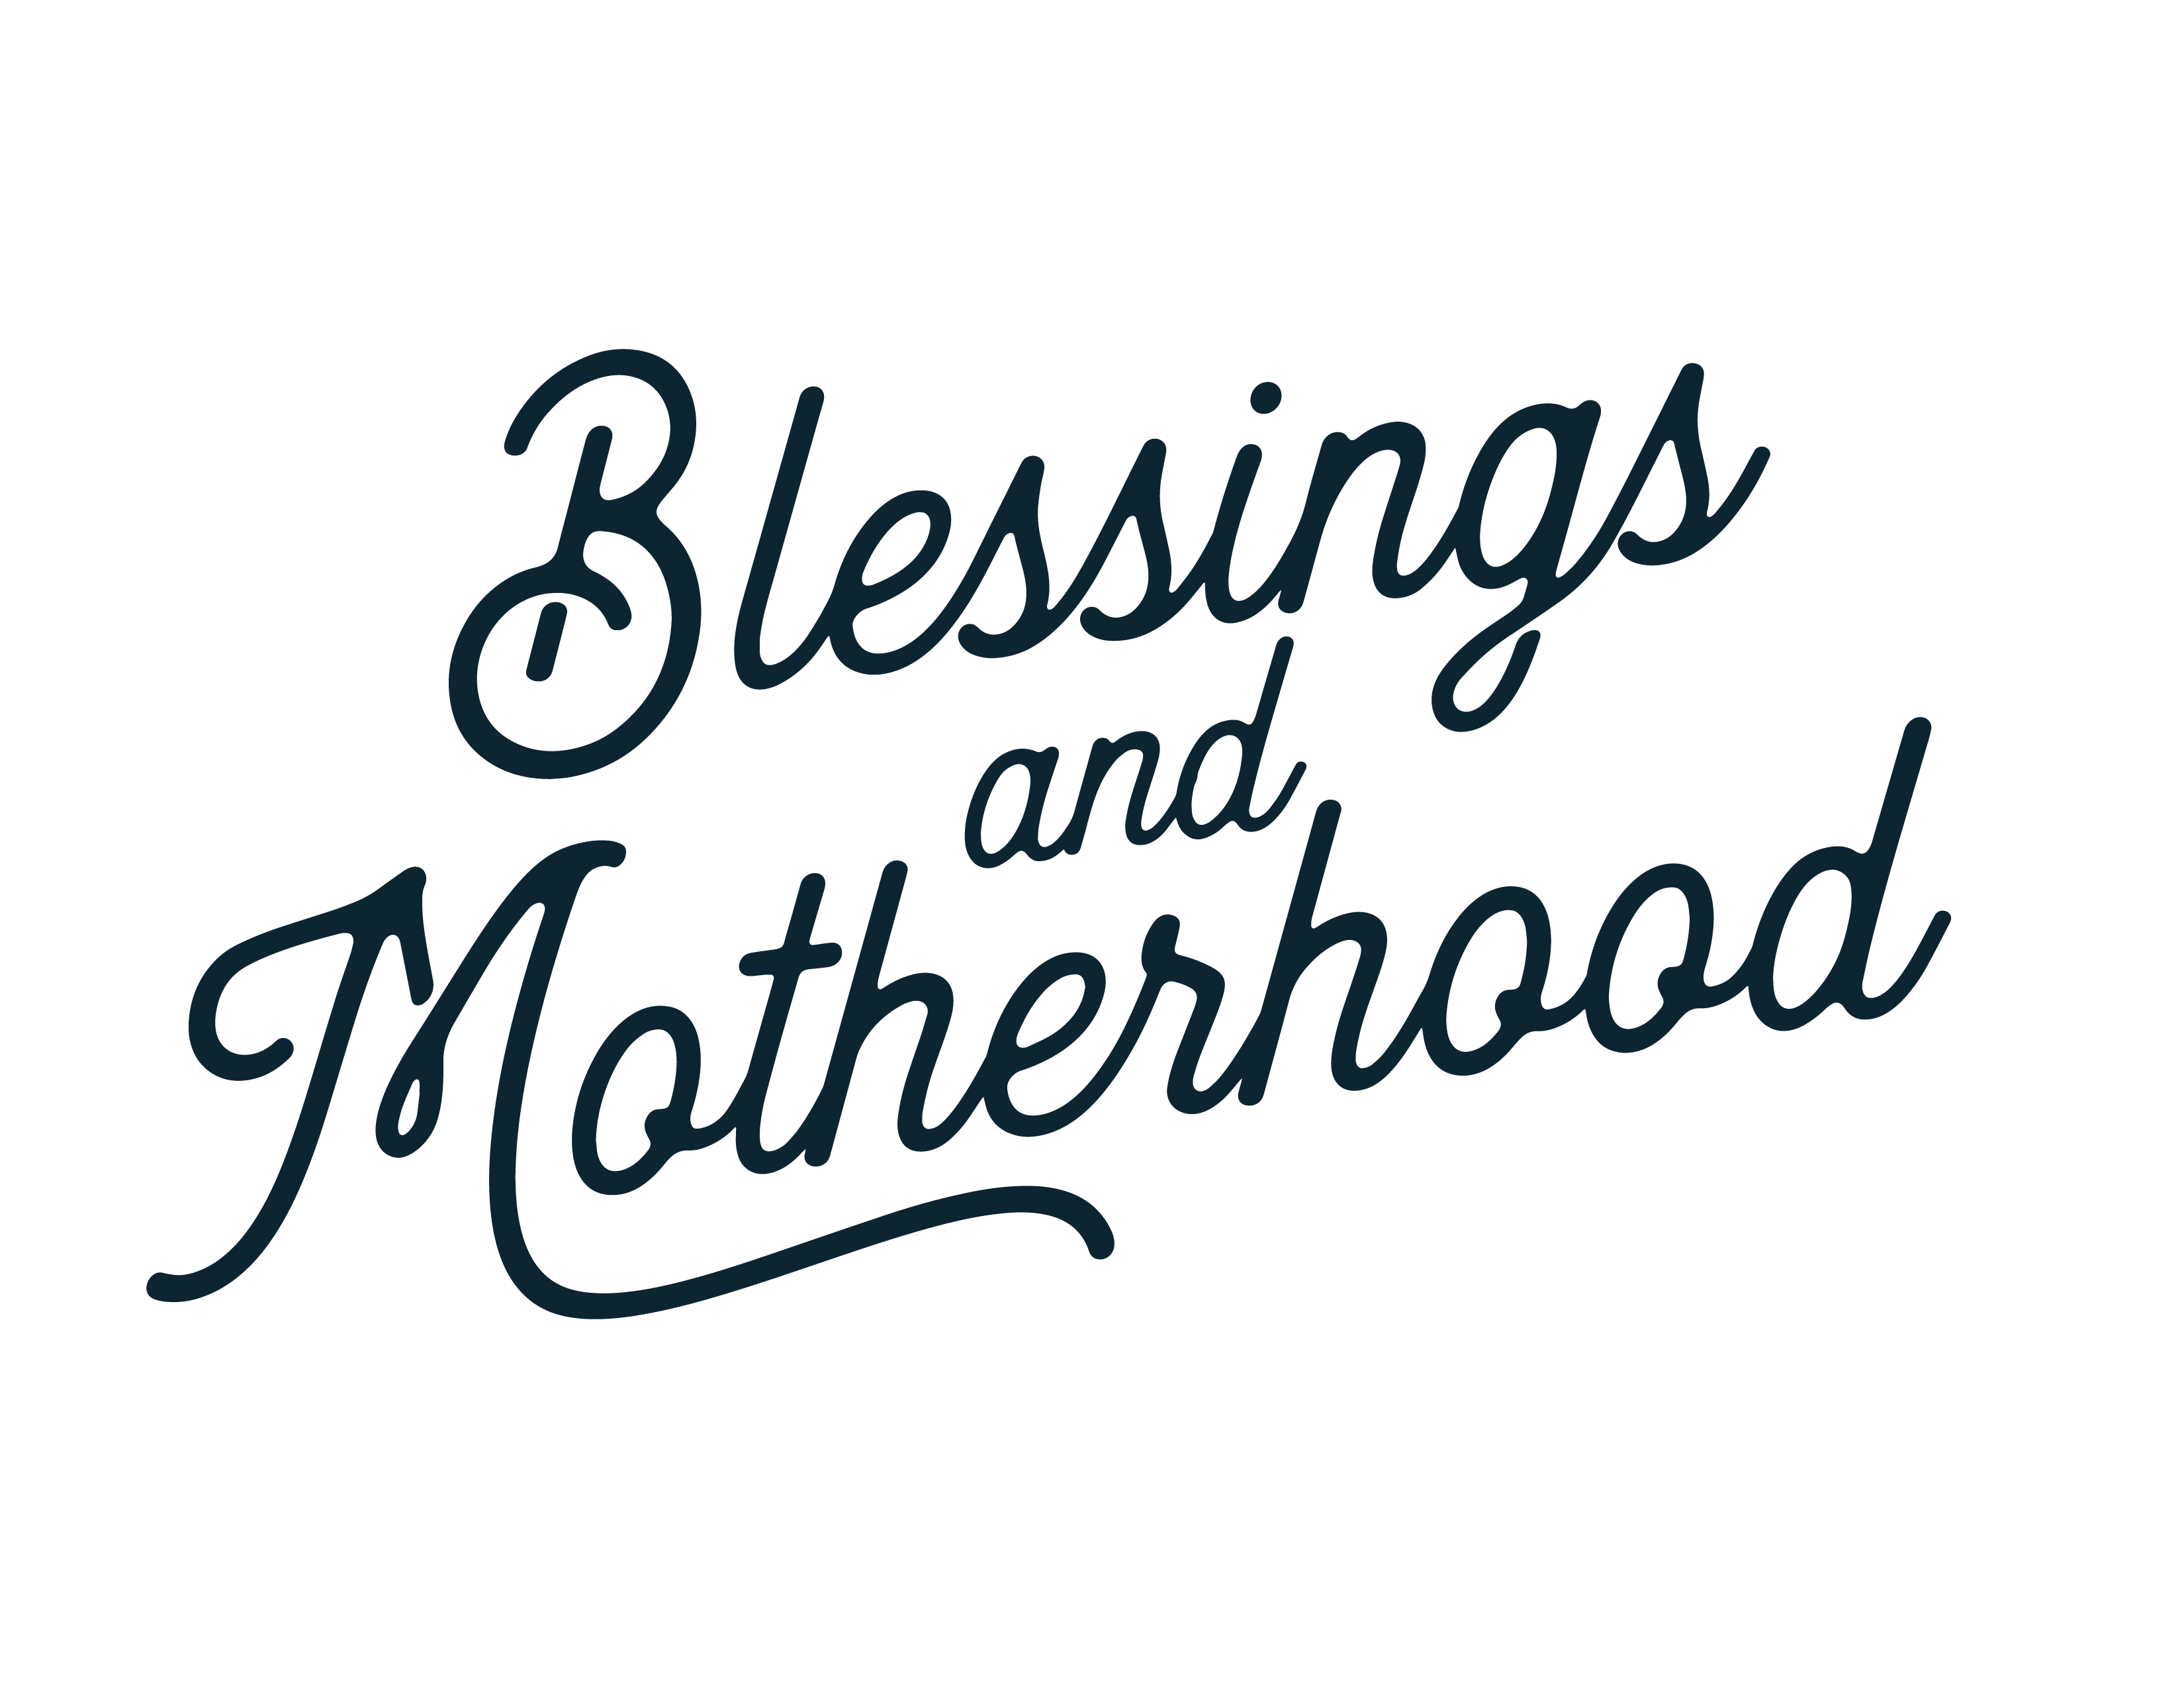 Blessings and Motherhood site logo in navy blue